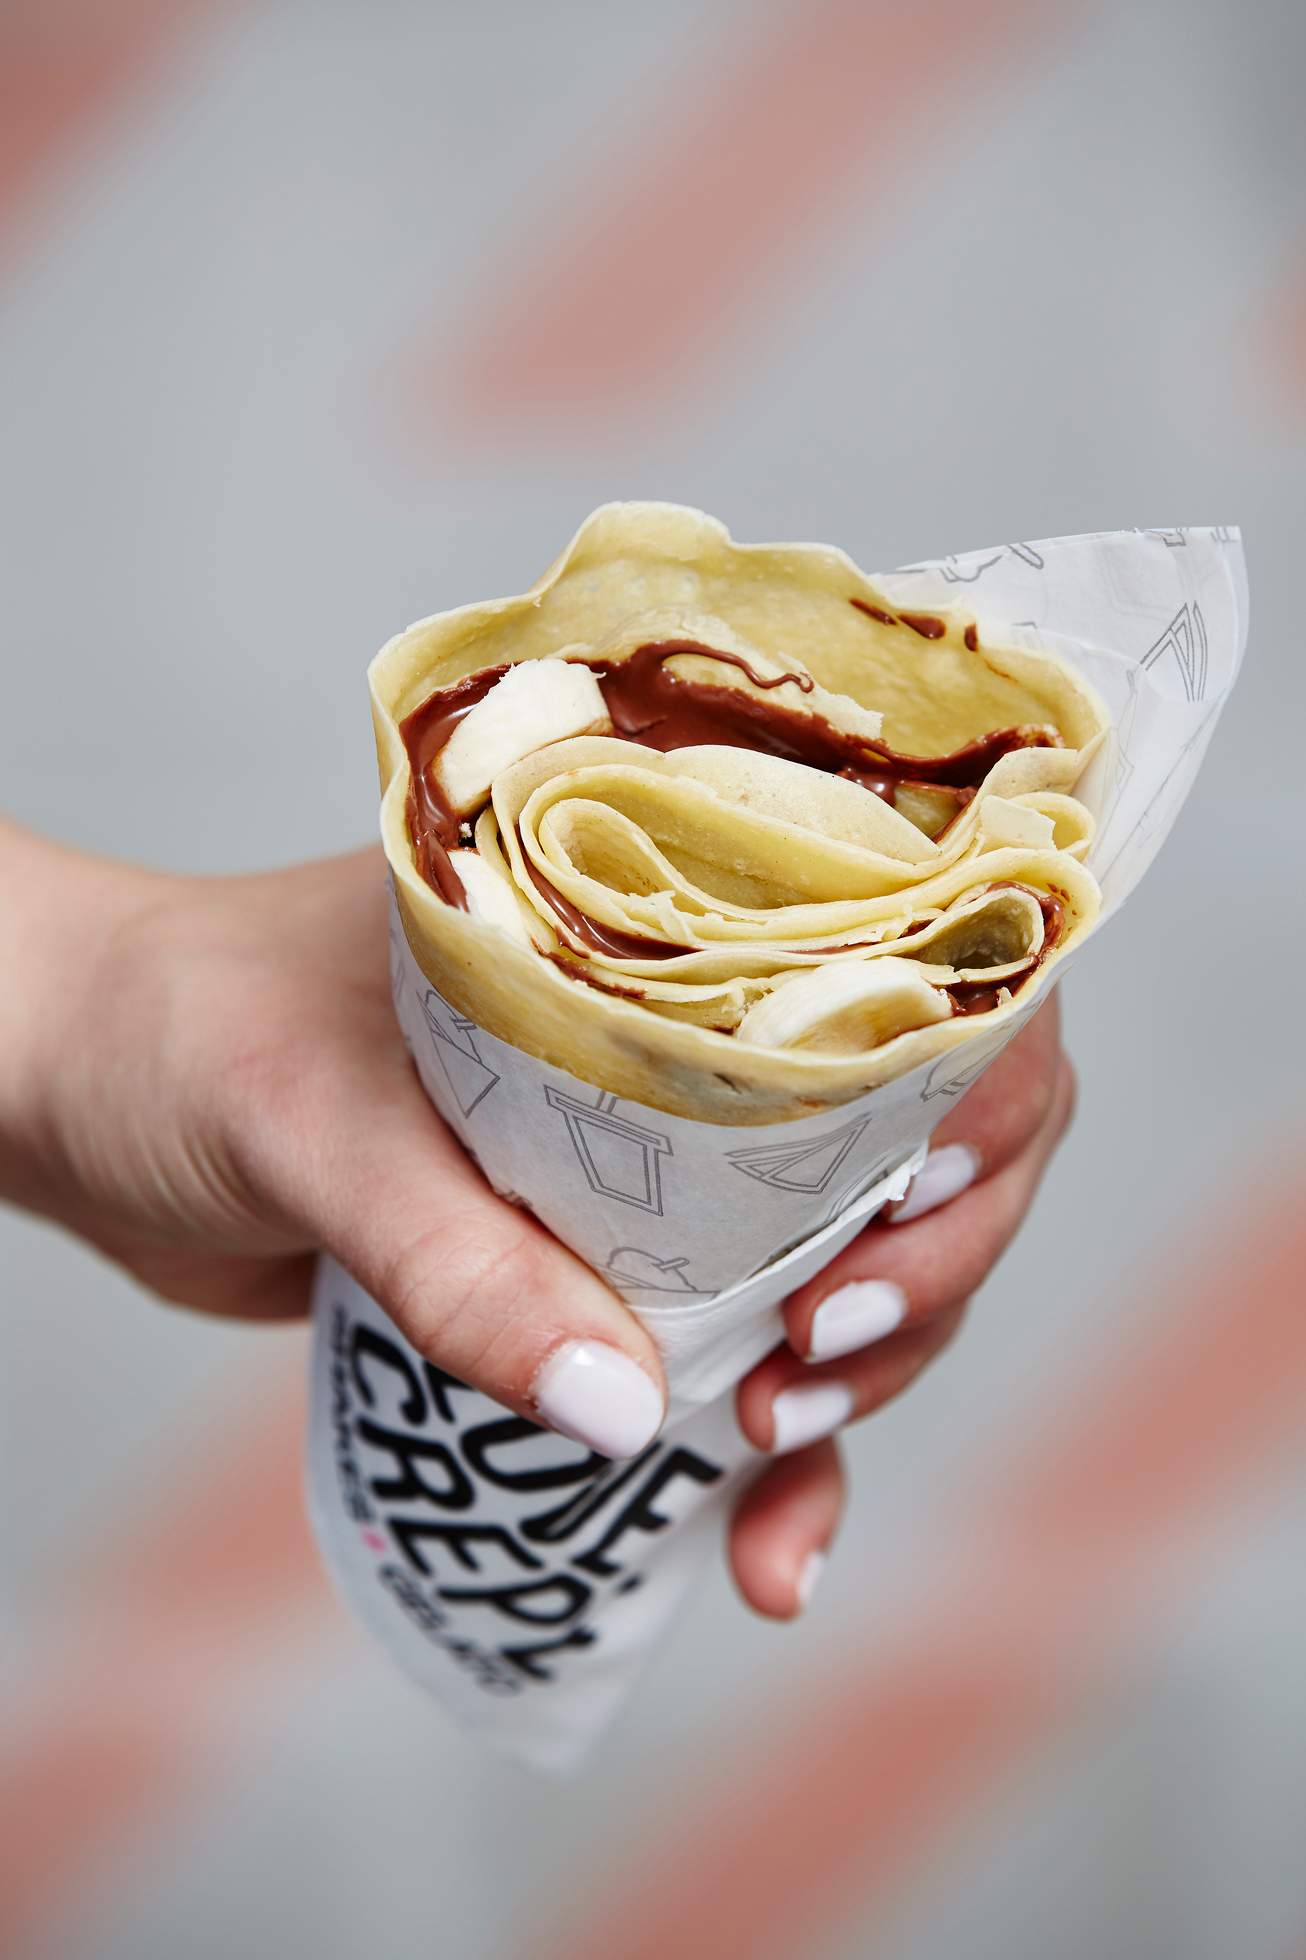 Love Crepe Is Pyrmont's New Palace of Crepes, Shakes and Gelato